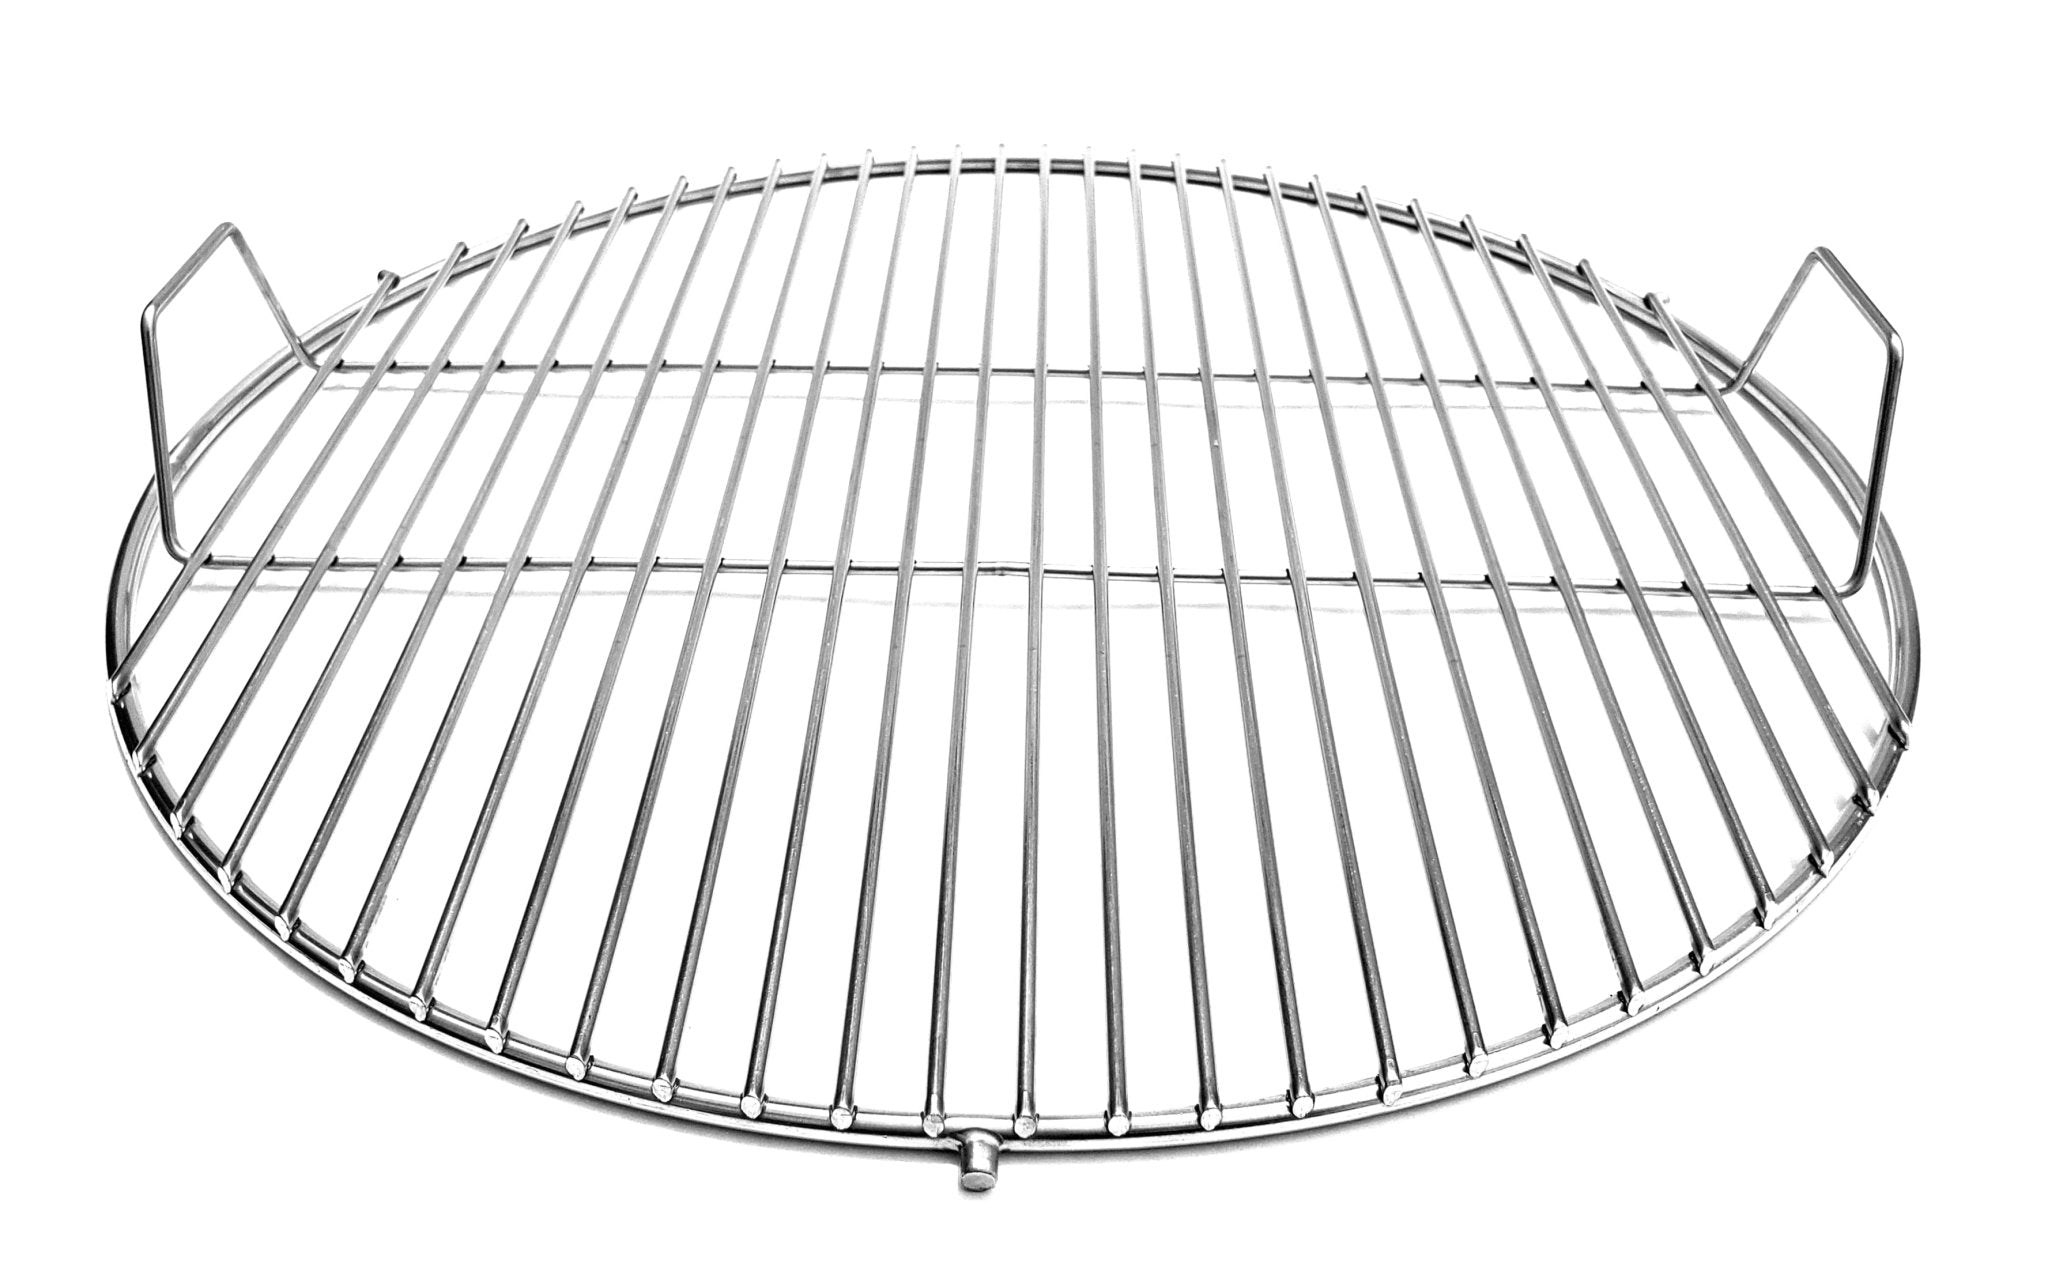 Stainless Steel Heavy-Duty Cooking Grate - Hunsaker Vortex Smokers